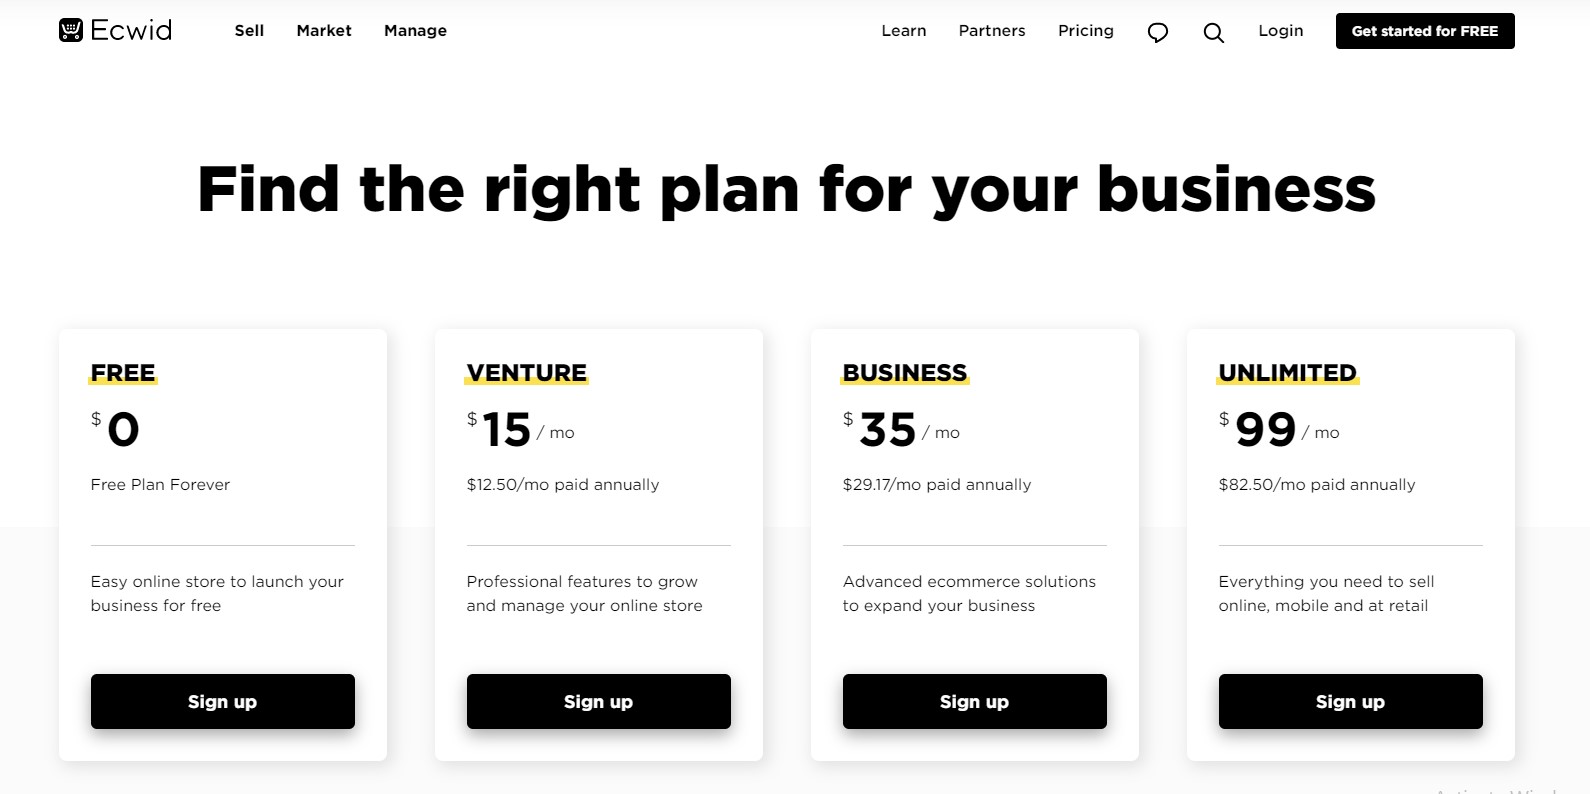 Ecwid's pricing plans